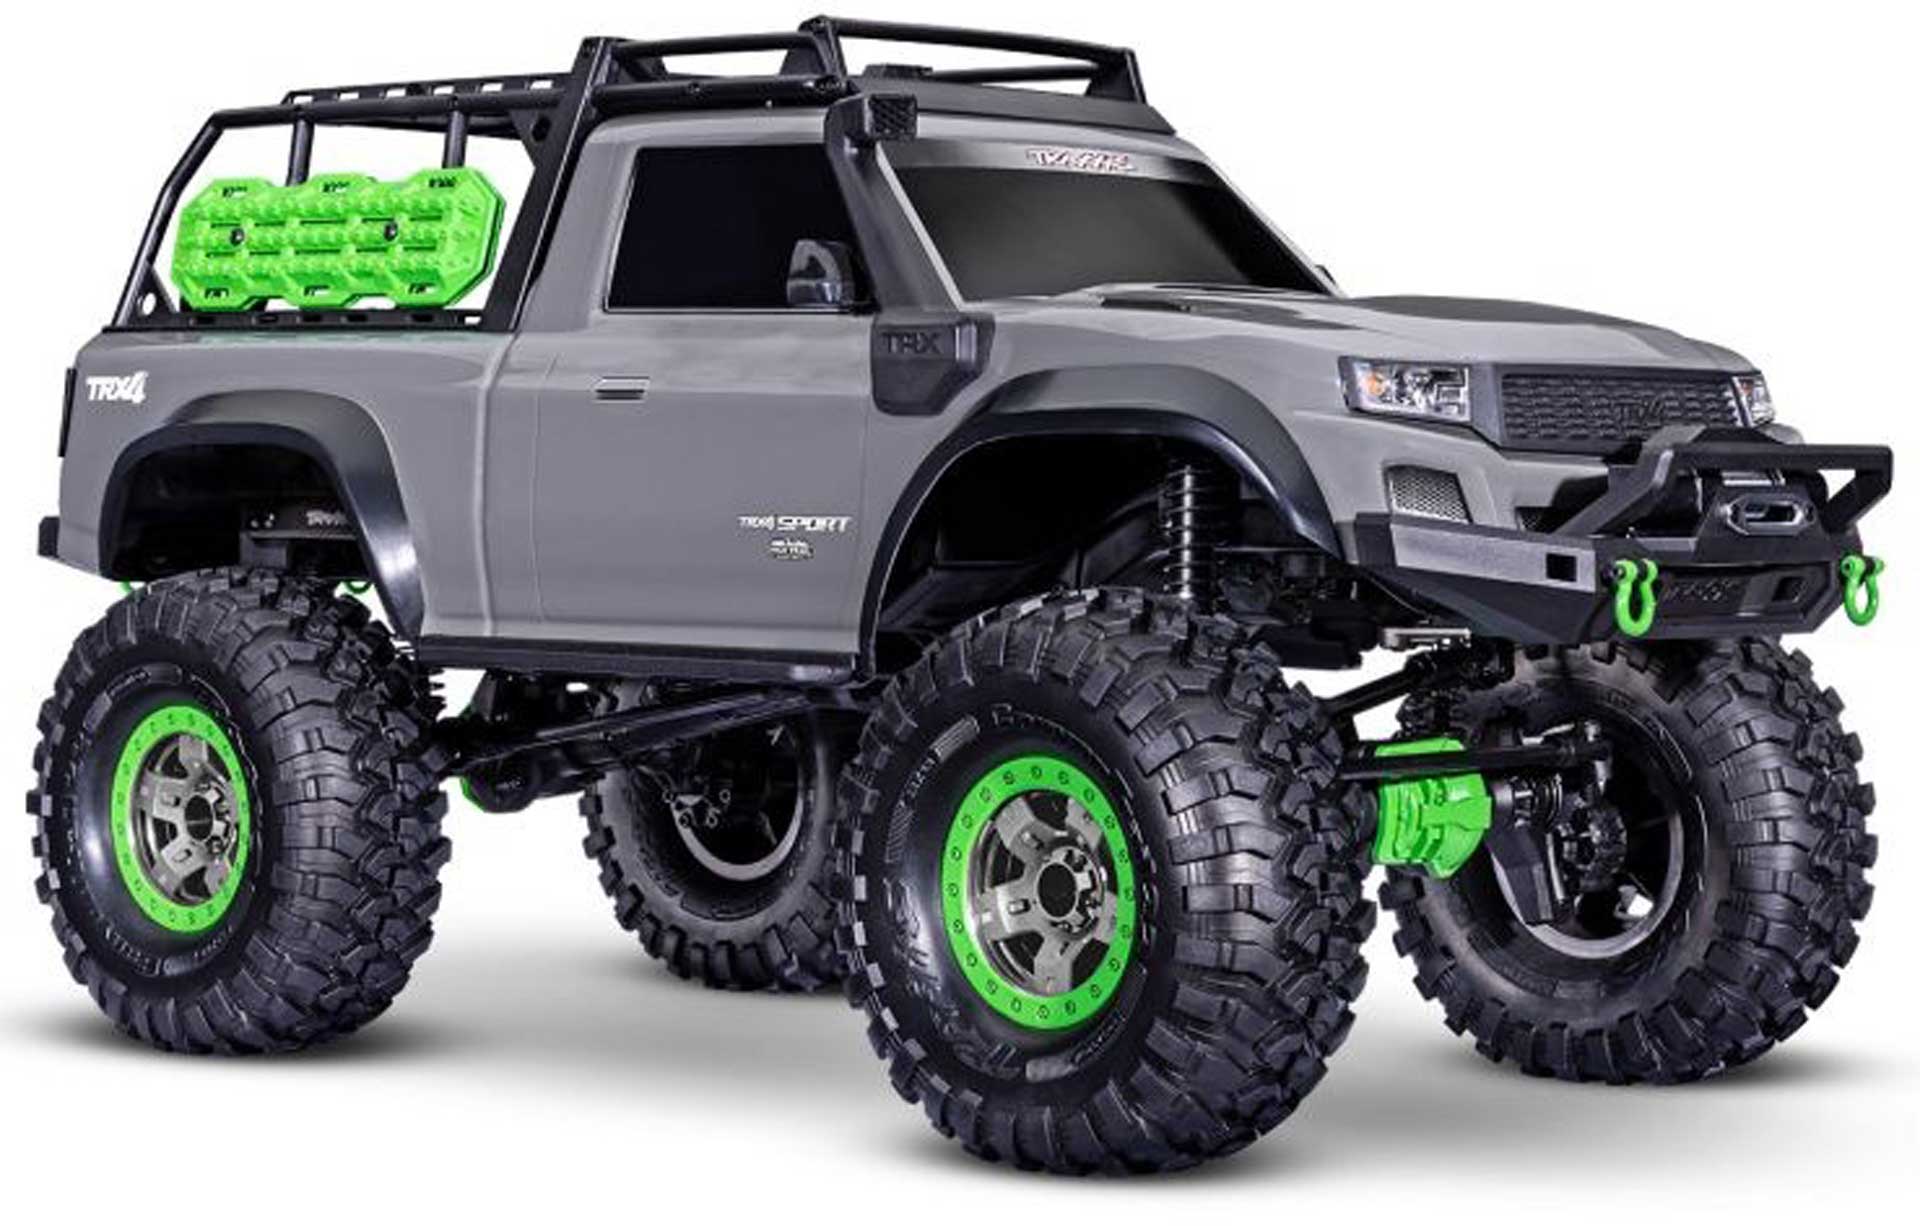 TRAXXAS TRX-4 SPORT HIGH TRAIL GRIS 1/10 4WD SCALE-CRAWLER RTR BRUSHED, SANS BATTERIE NI CHARGEUR